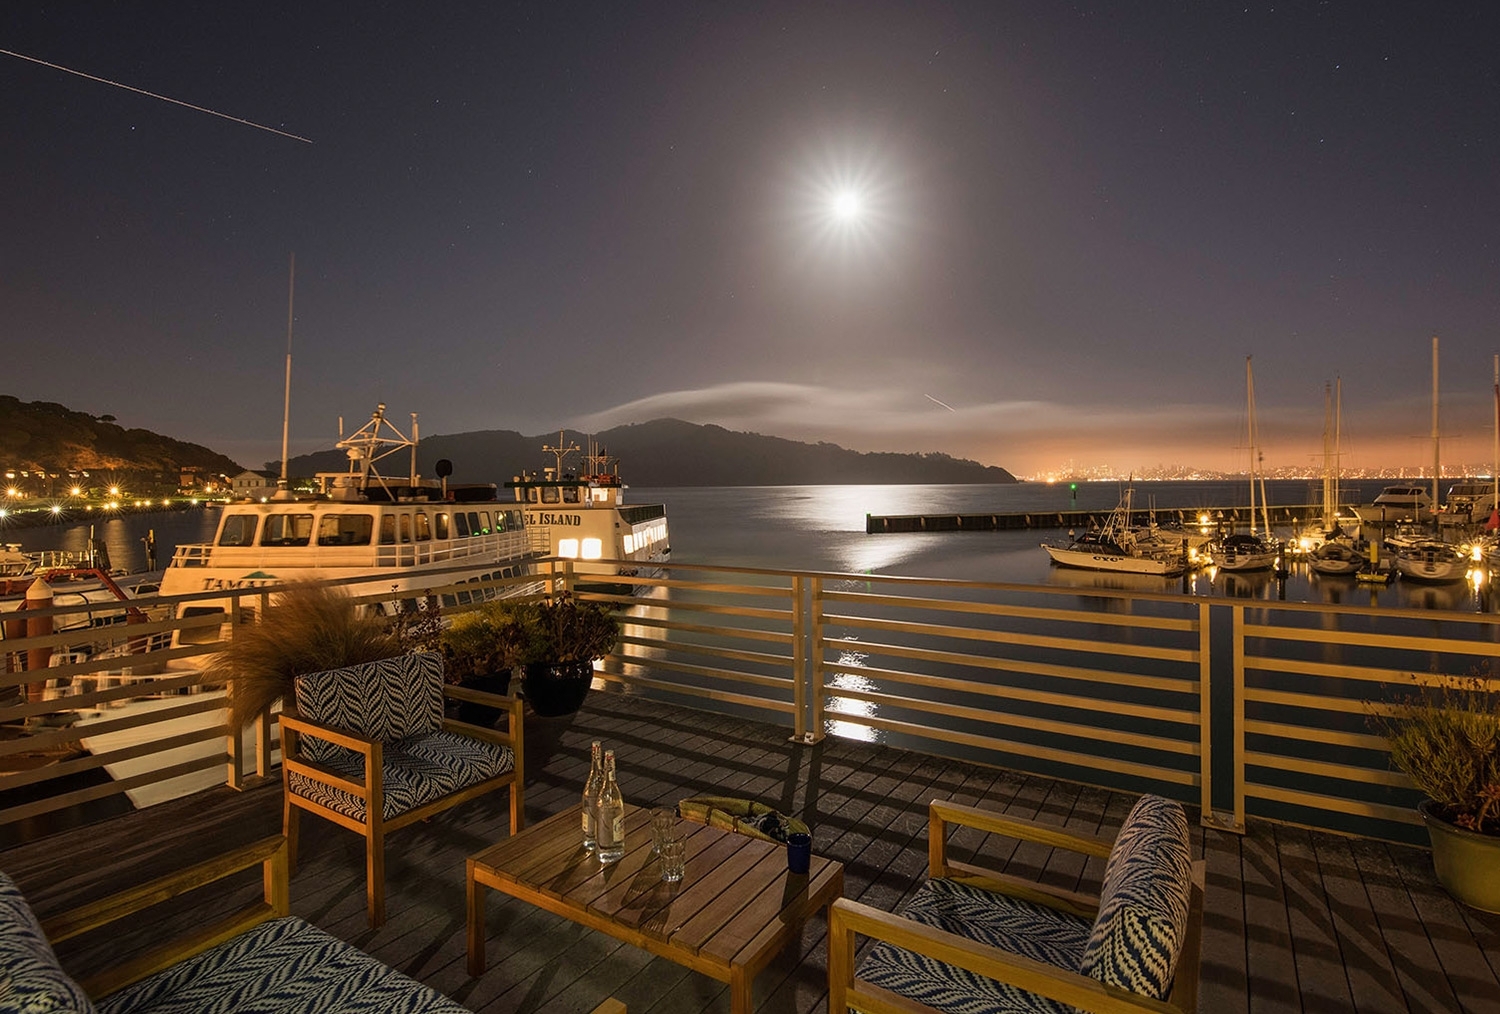 The full moon rise over Angel Island from Waters Edge Hotel deck13-5458.jpg